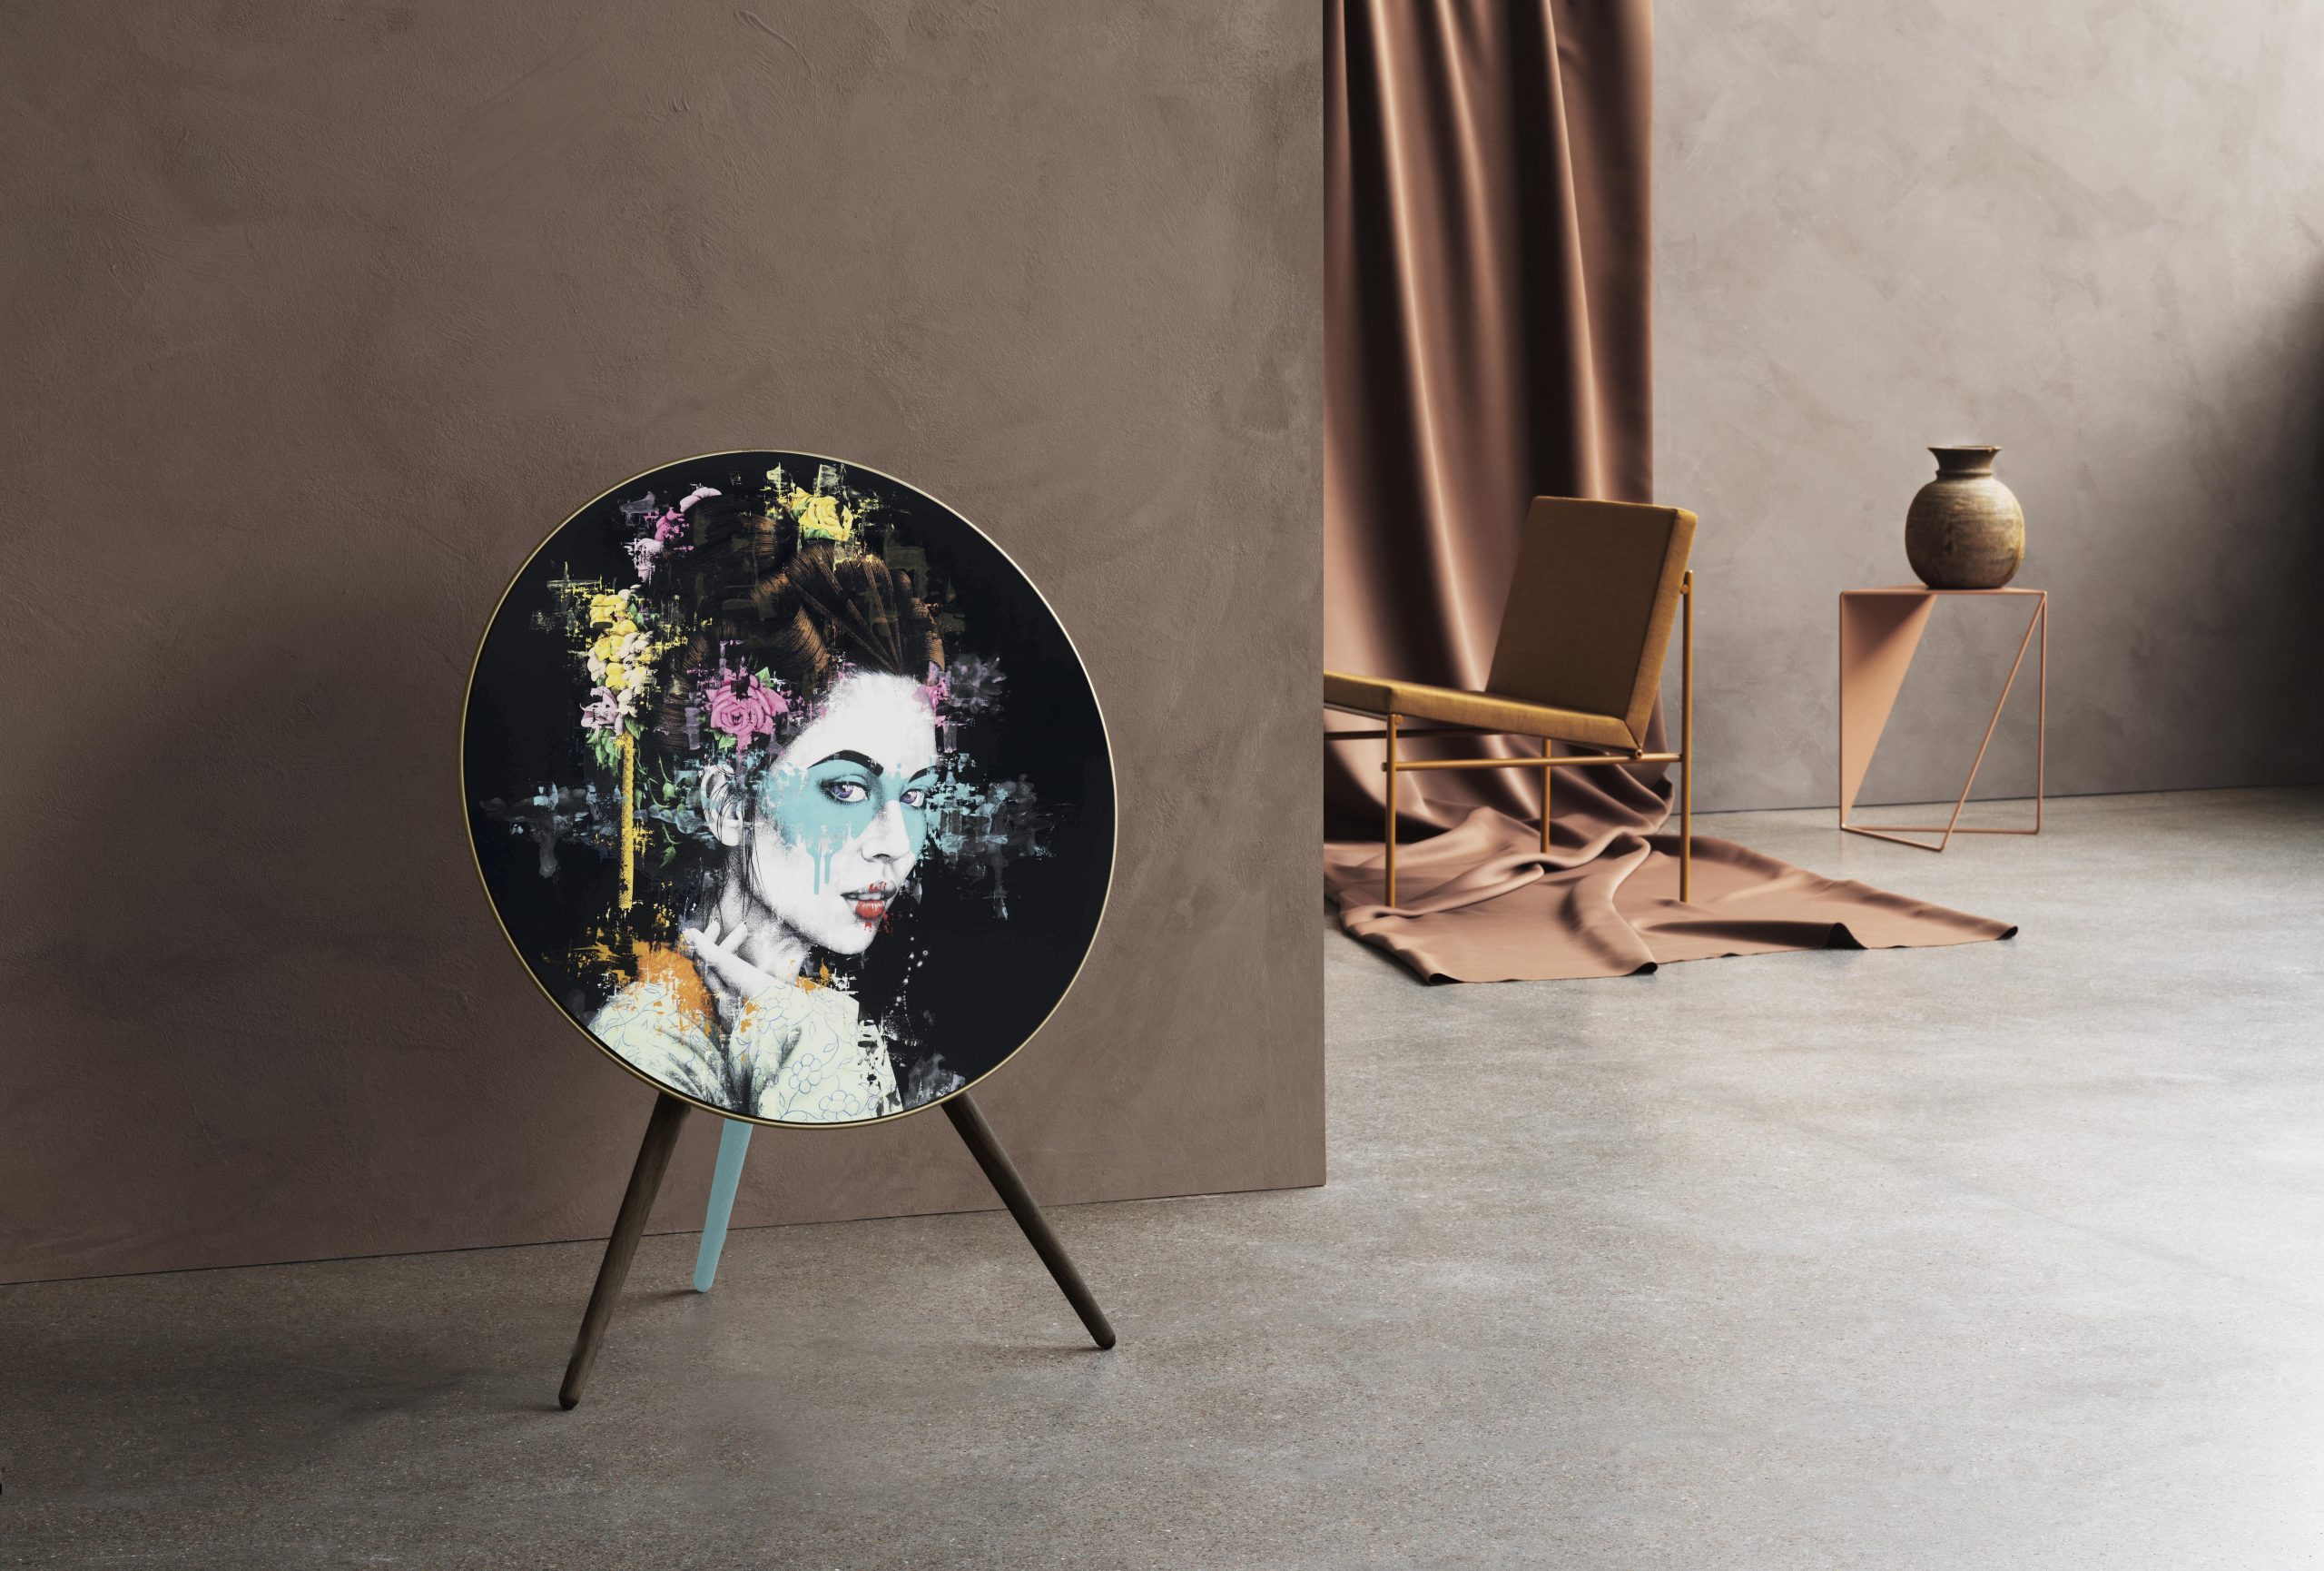 Olufsen collaborates with Fin DAC on Speaker